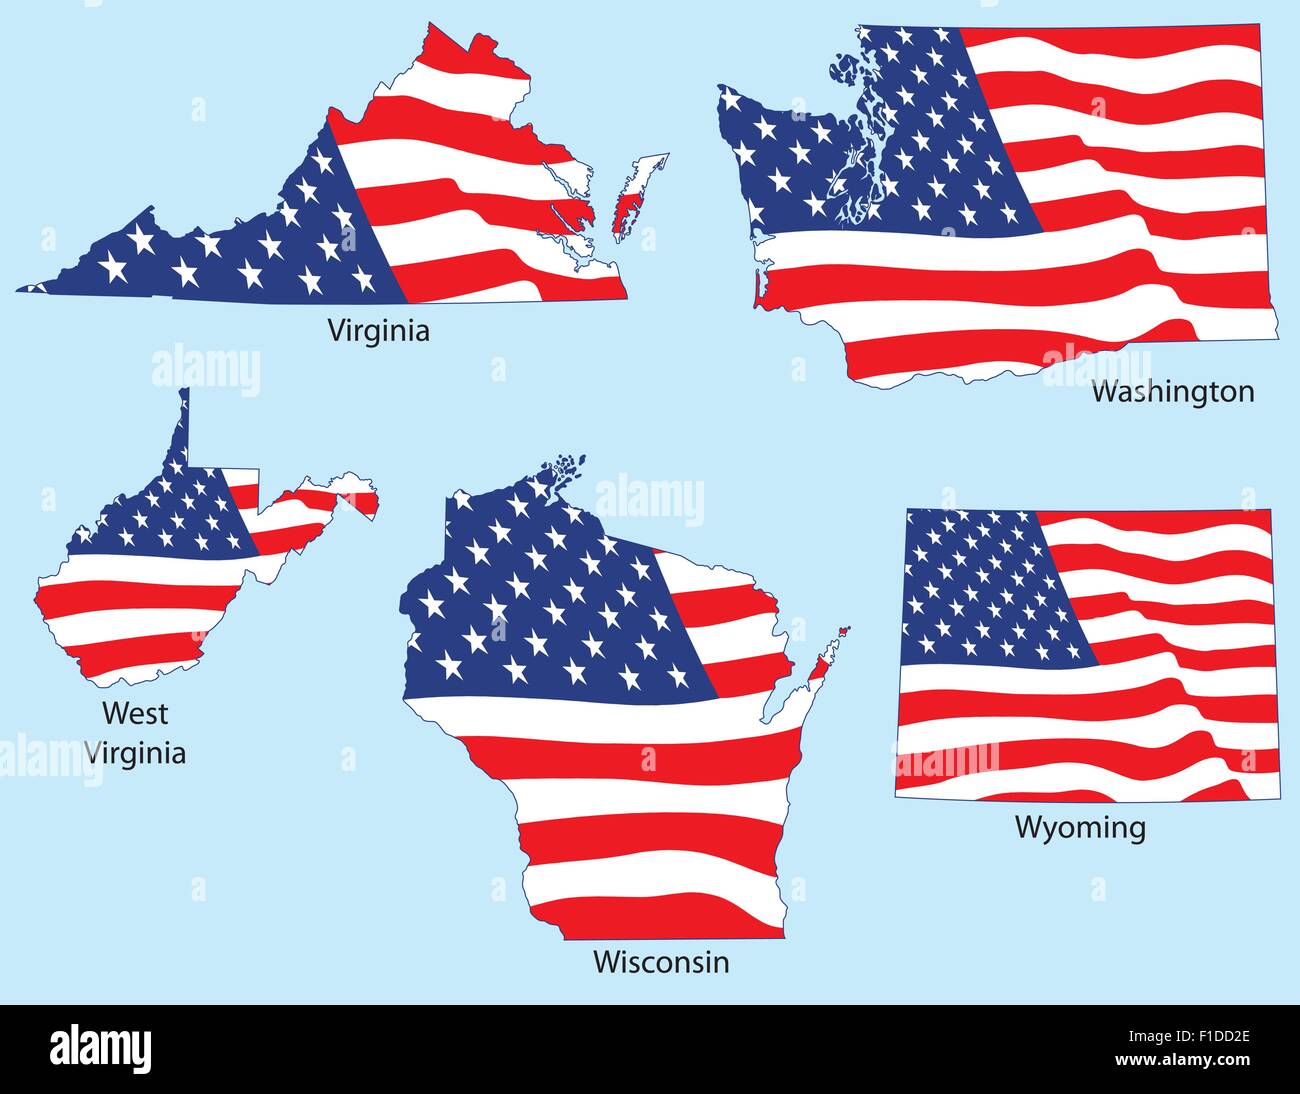 Virginia, Washington, West Virginia, Wisconsin, Wyoming outlines with flags, each individually grouped Stock Vector